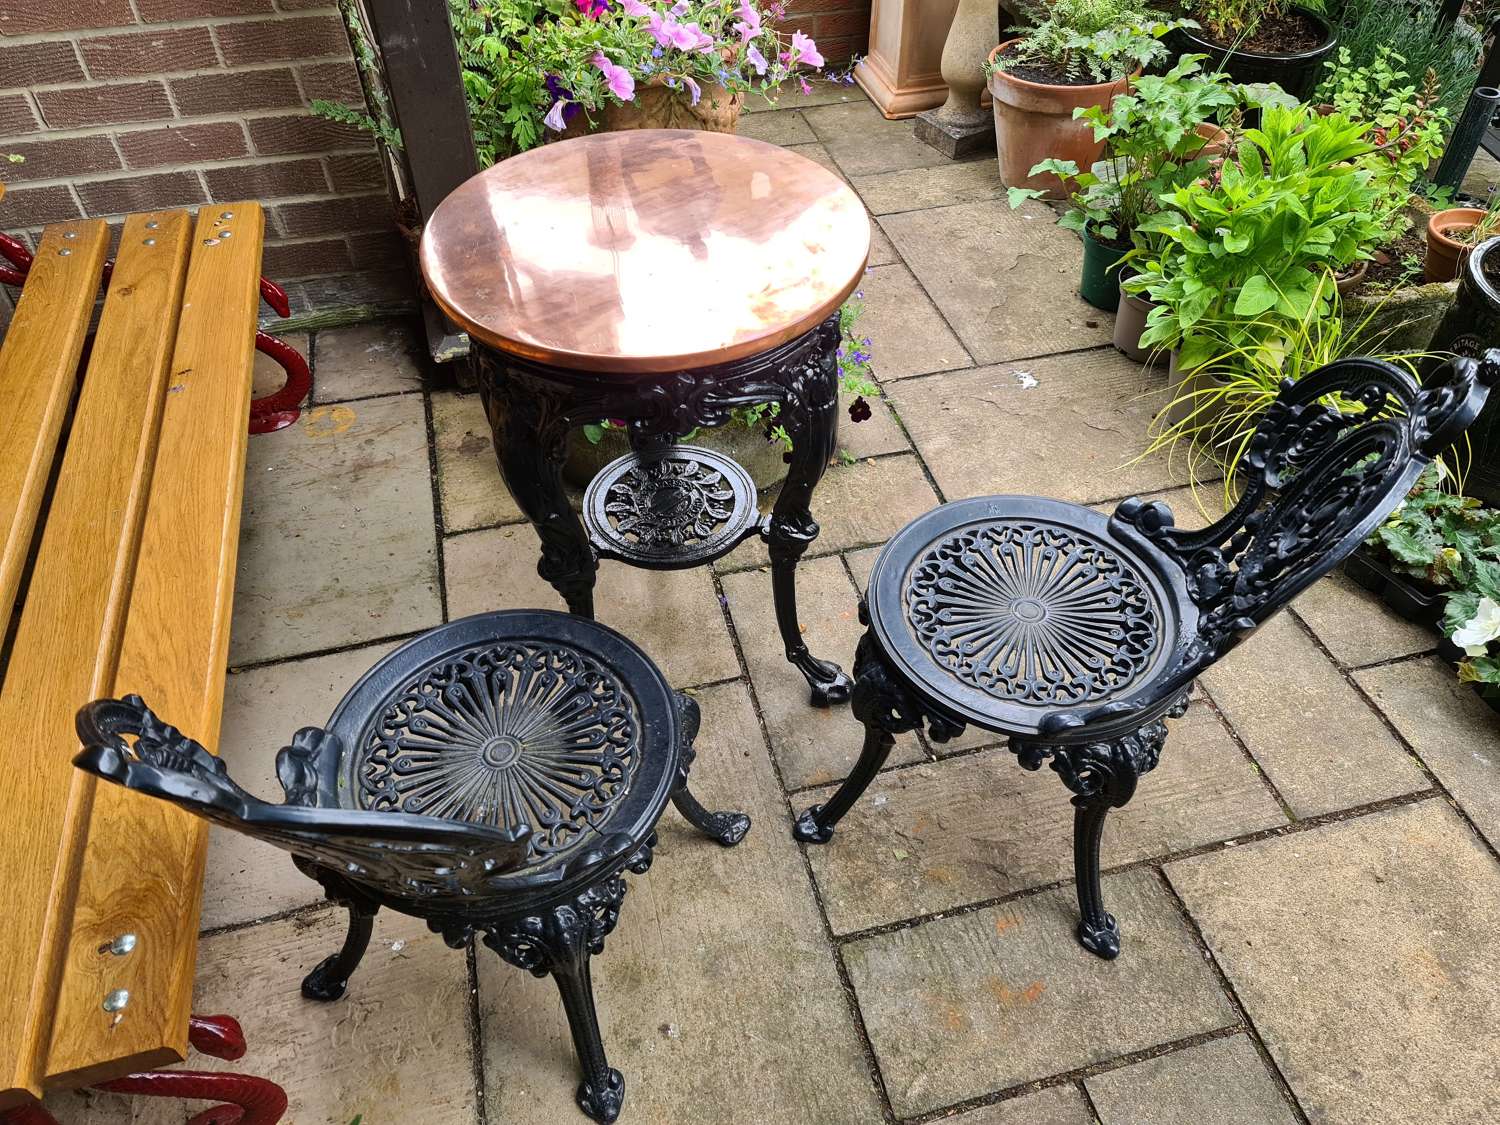 Cast-iron Garden Table with Copper Top and Garden Chairs